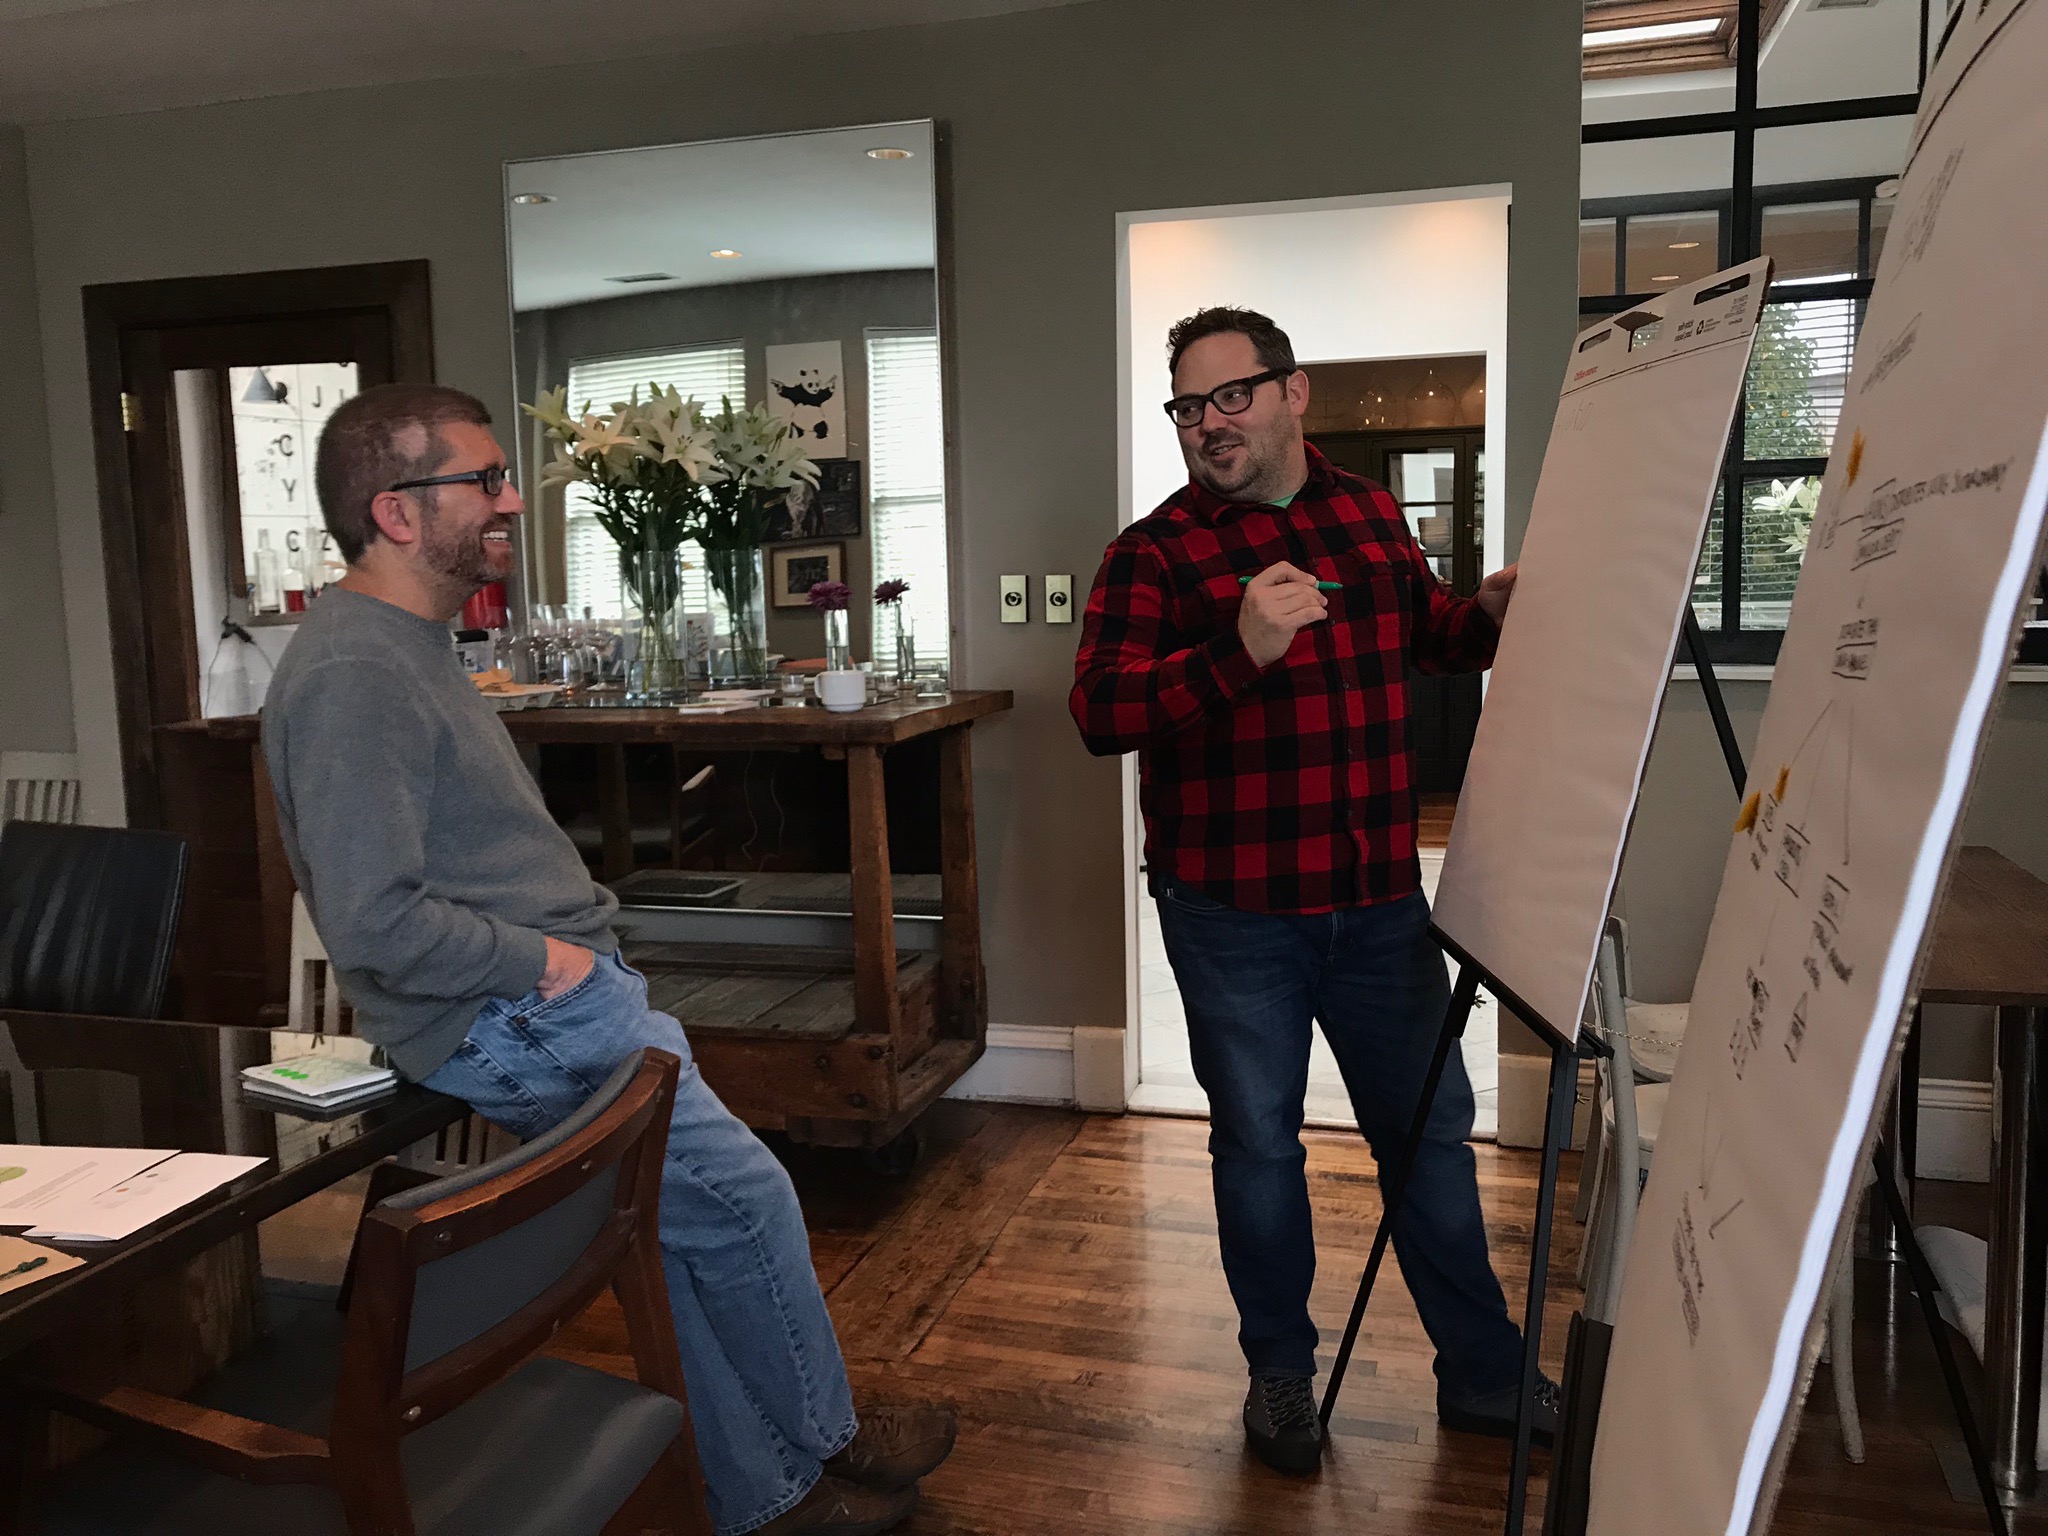 Rich and Jesse build and discuss a customer journey map